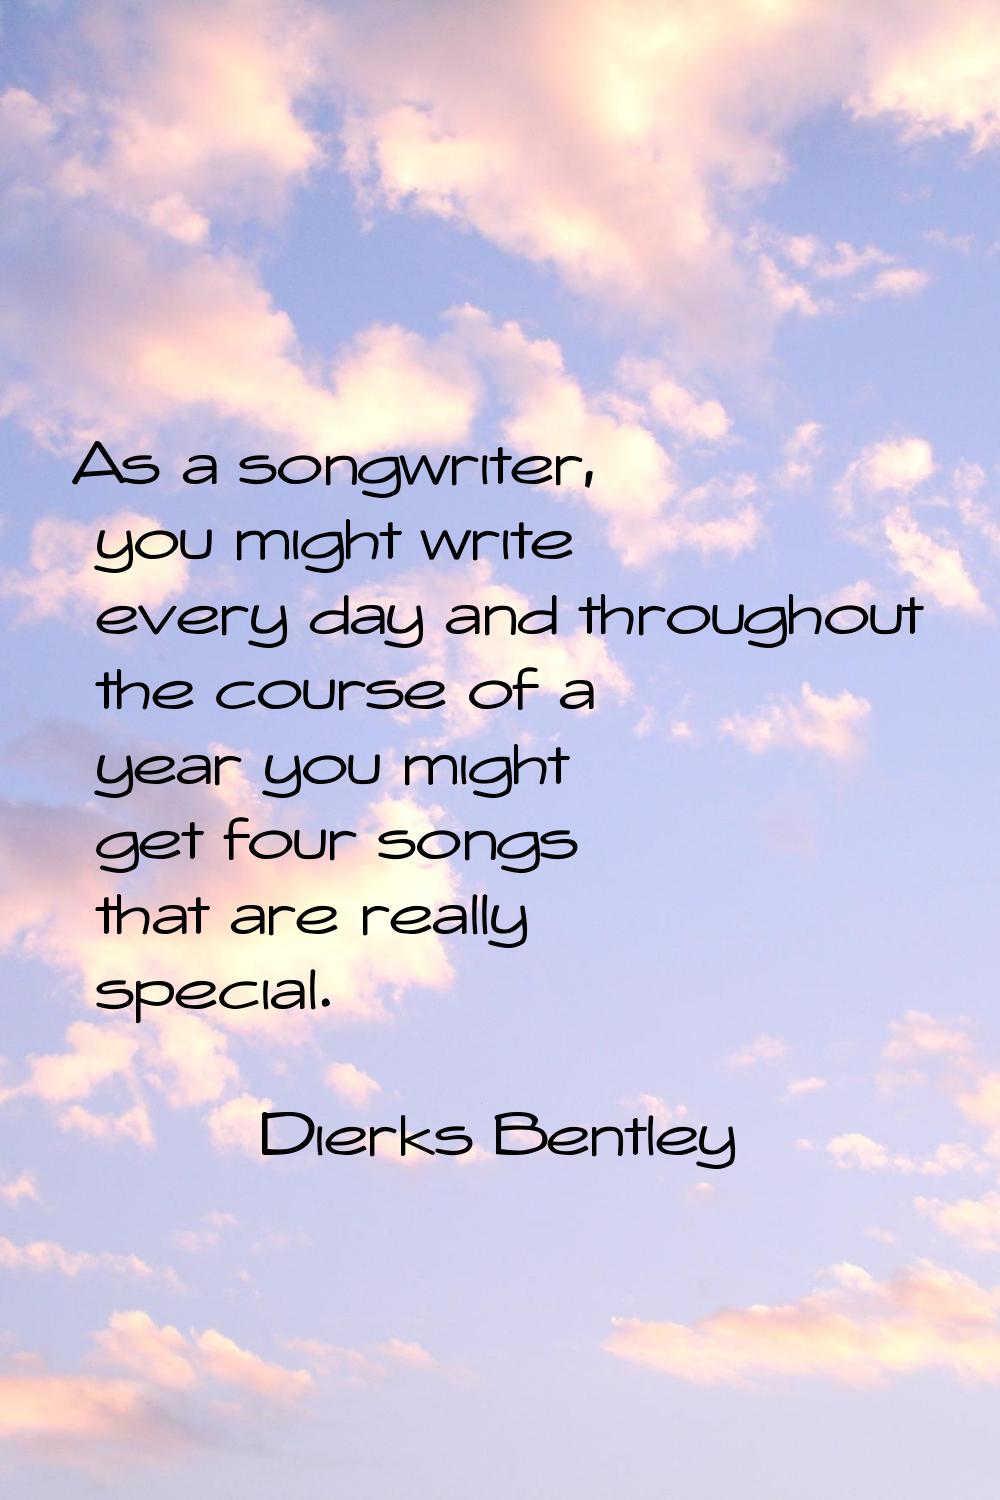 As a songwriter, you might write every day and throughout the course of a year you might get four s